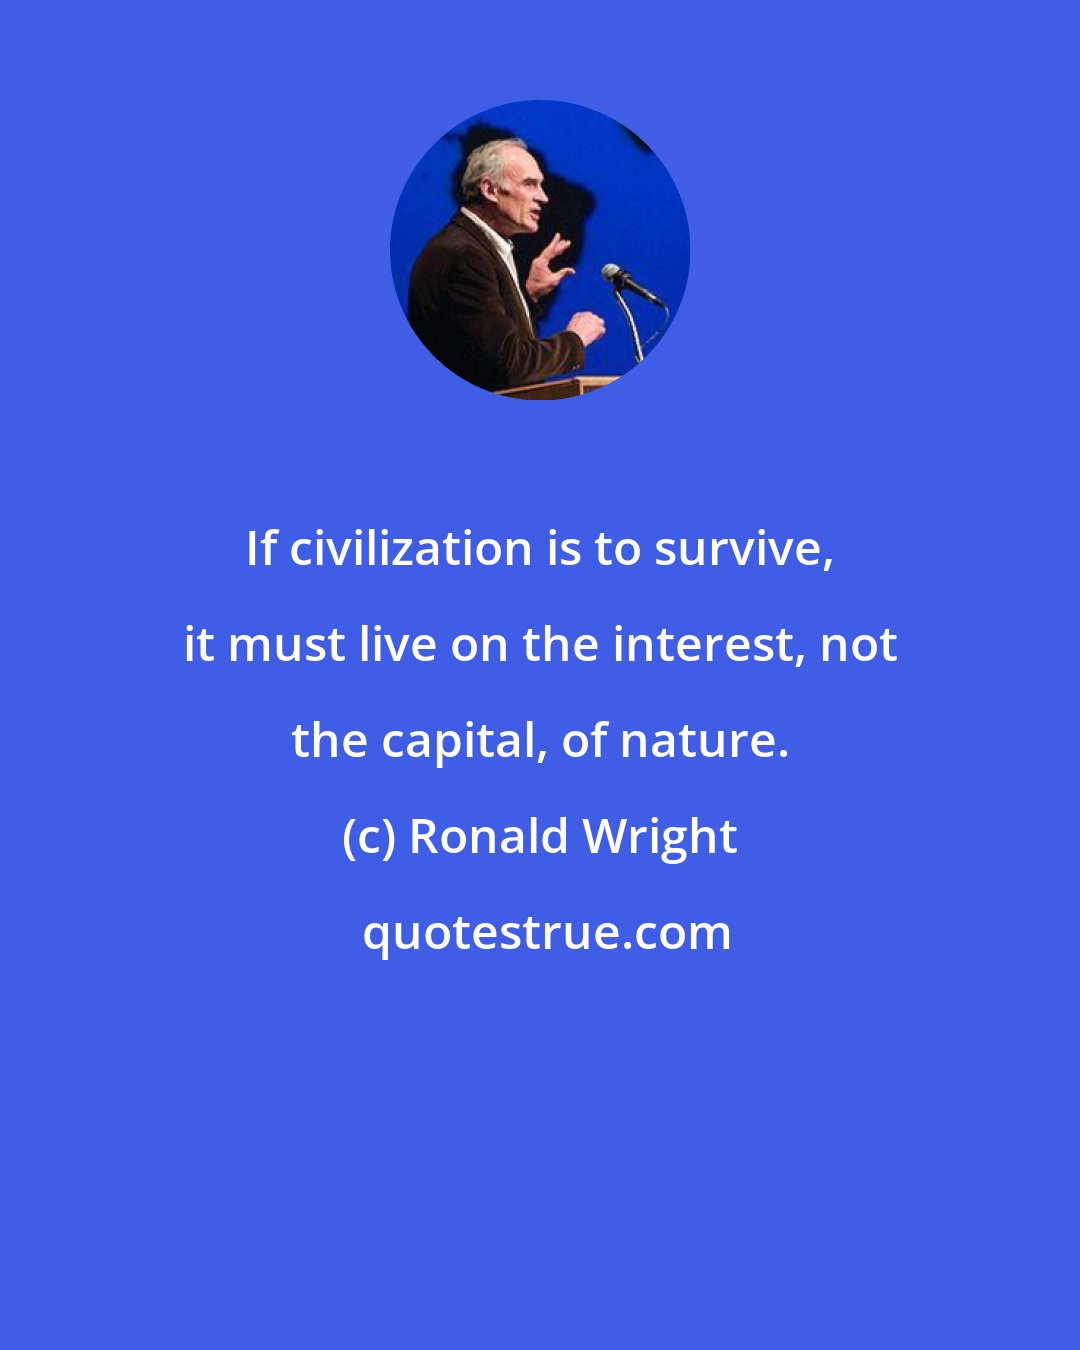 Ronald Wright: If civilization is to survive, it must live on the interest, not the capital, of nature.